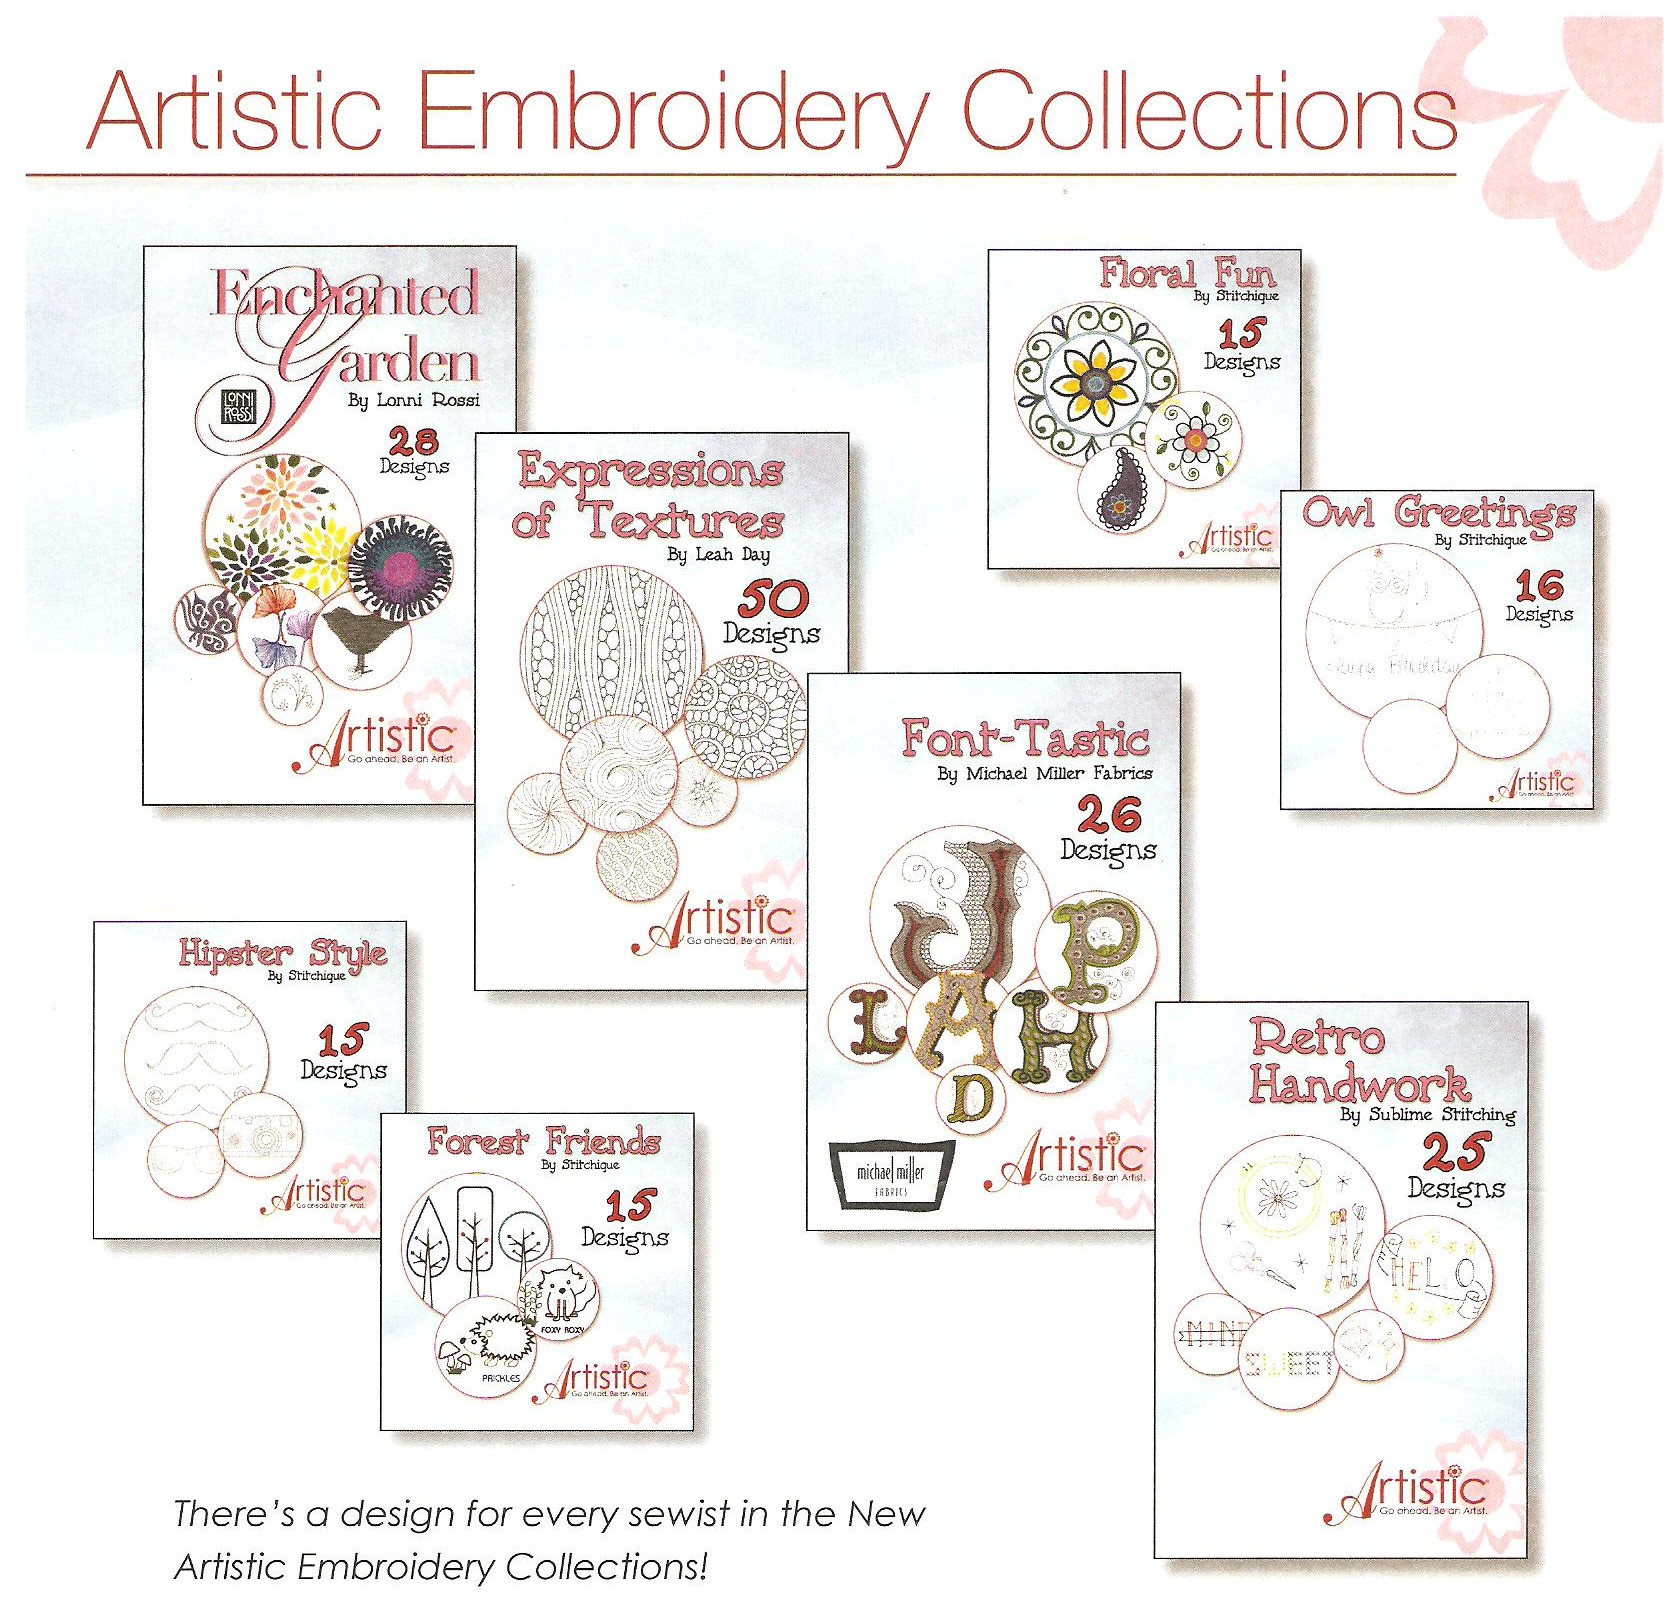 Janome Embroidery Patterns Artistic Embroidery Collections Floral Fun Stitchique Janome Life